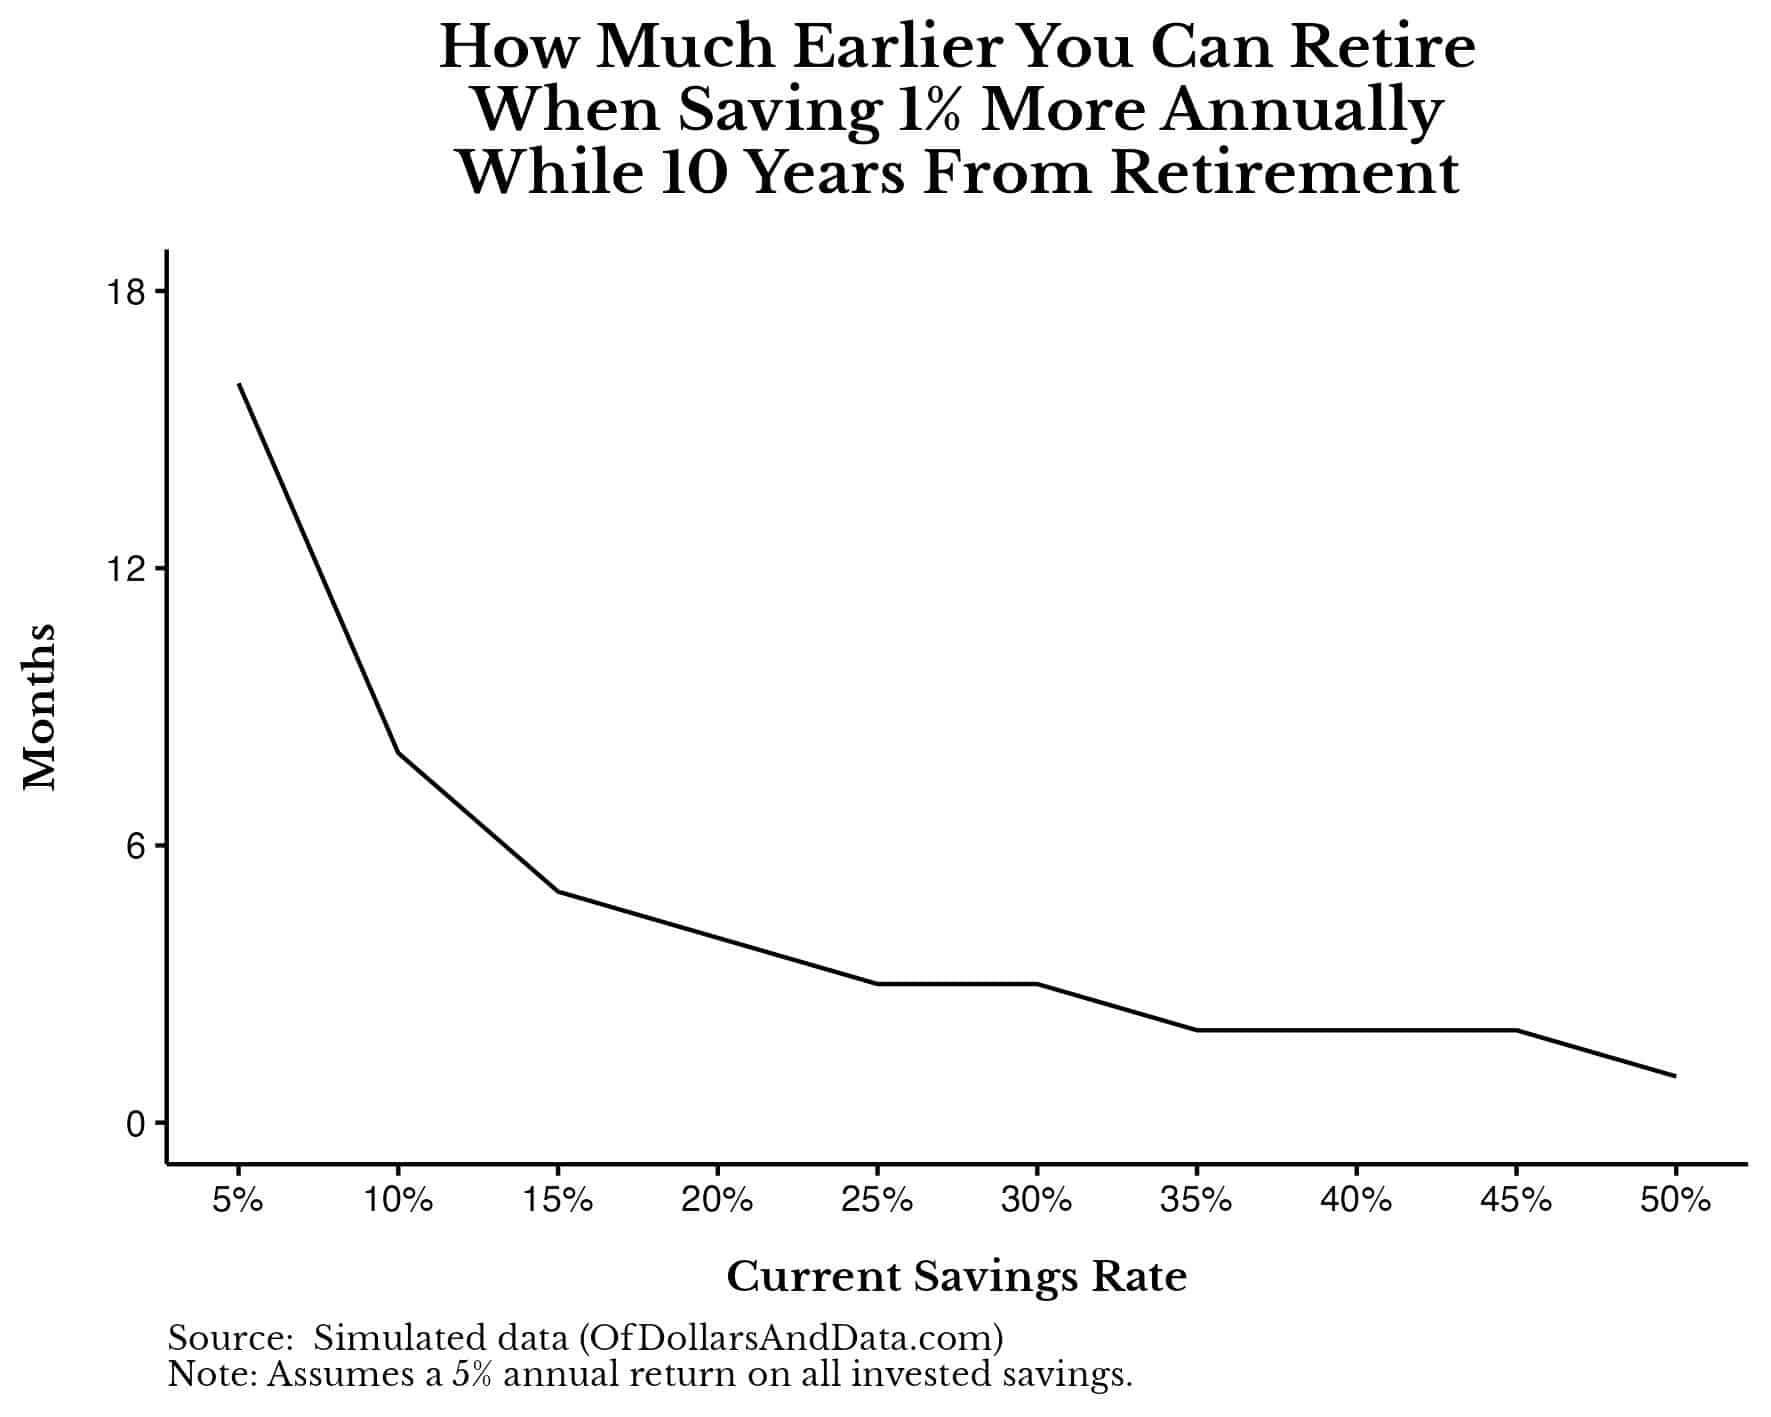 Chart showing much earlier you can retire if you save 1% more annually while 10 years from retirement.